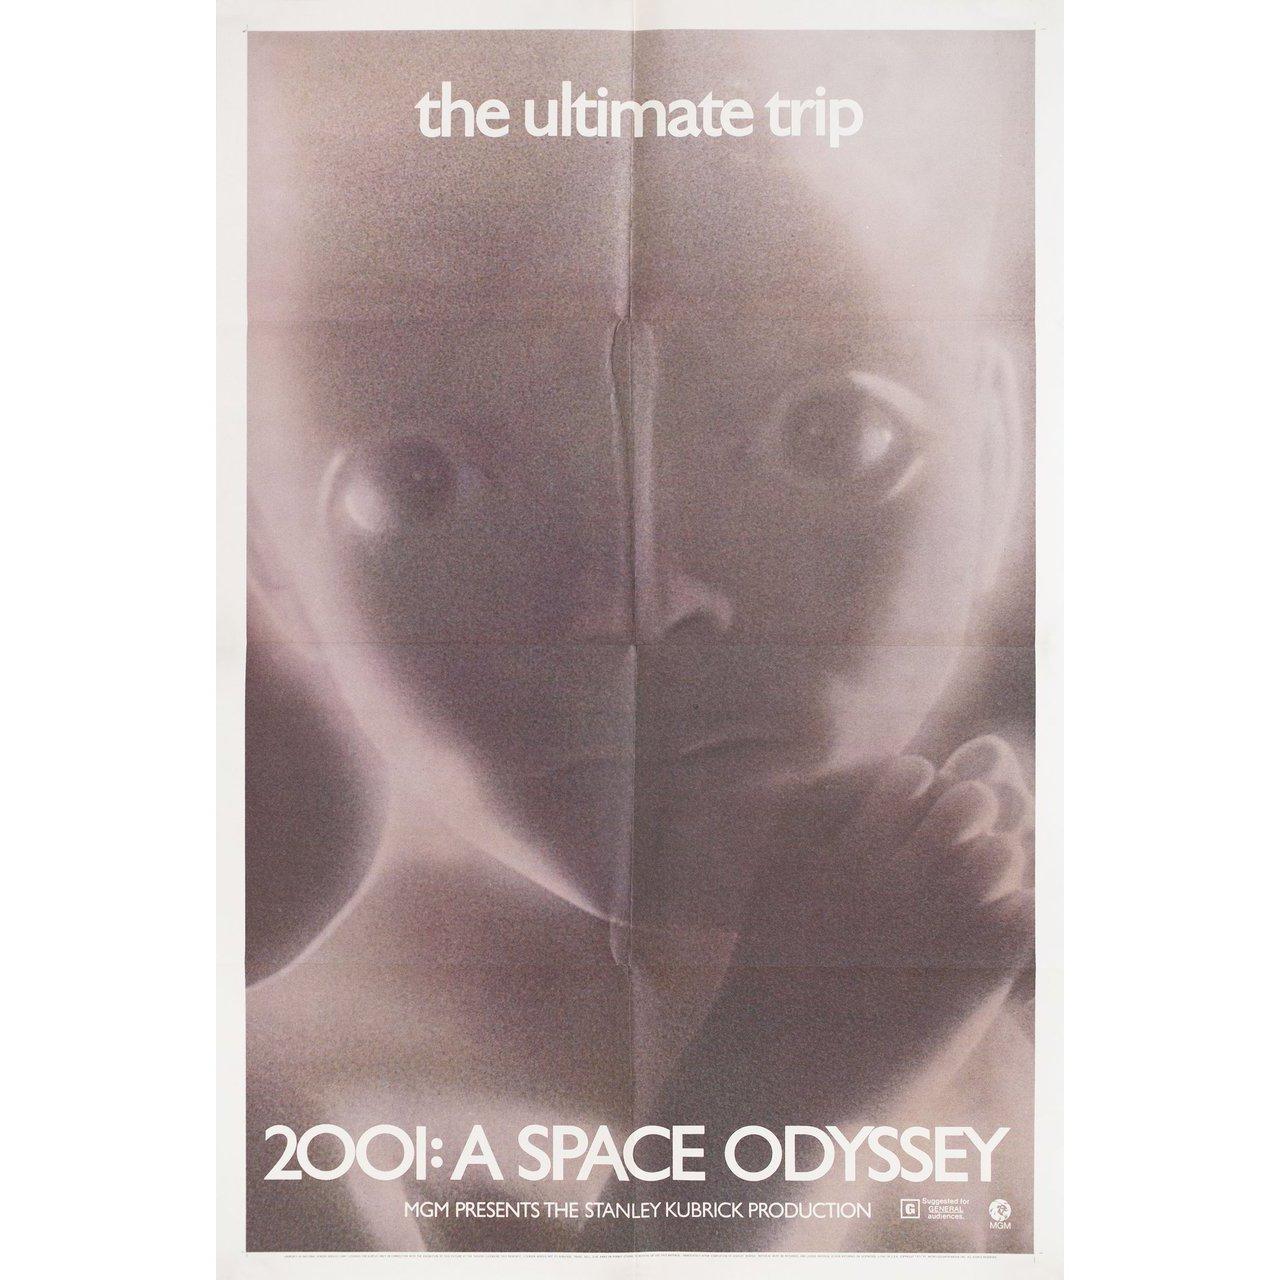 Original 1974 re-release U.S. one sheet poster for the 1968 film 2001: A Space Odyssey directed by Stanley Kubrick with Keir Dullea / Gary Lockwood / William Sylvester / Daniel Richter. Fine condition, folded. Many original posters were issued